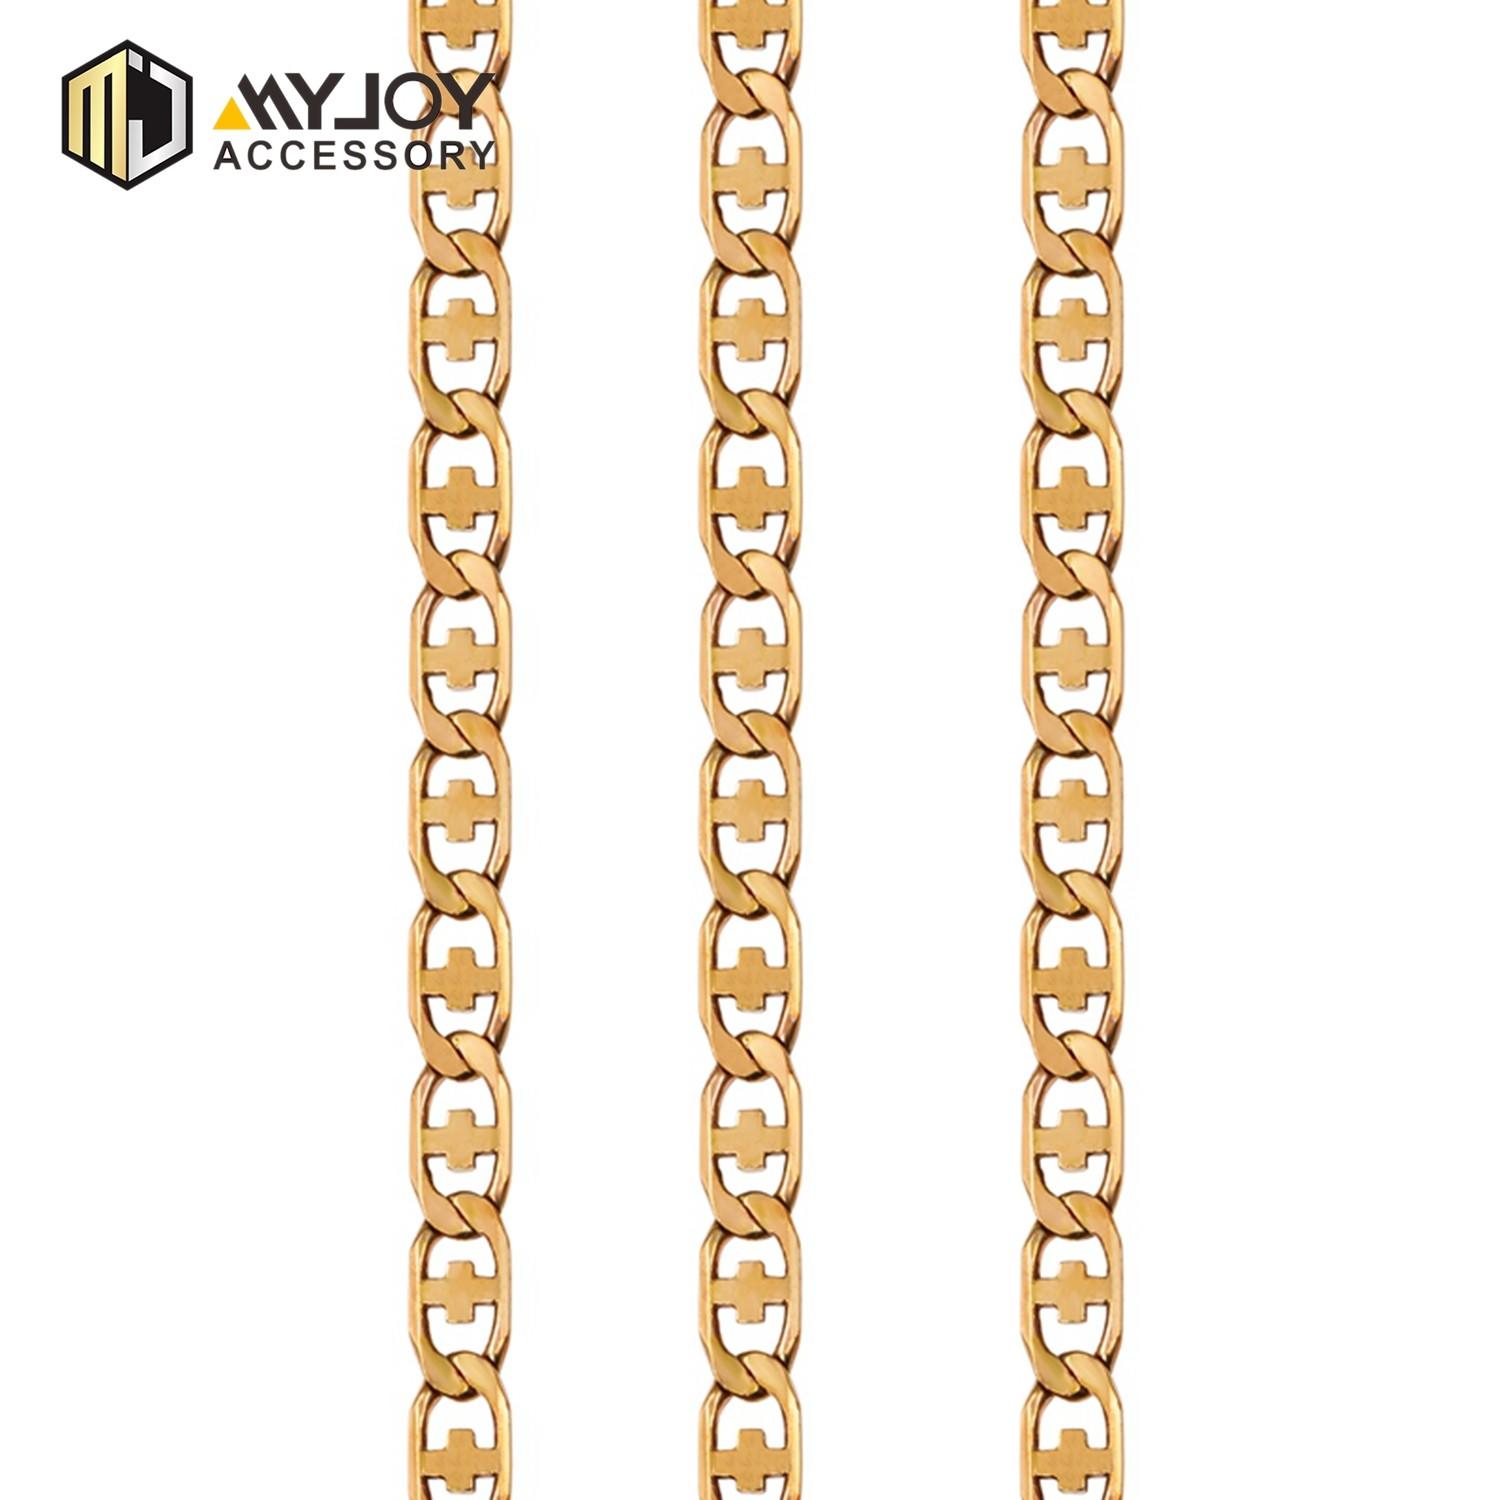 MYJOY alloy chain strap suppliers for purses